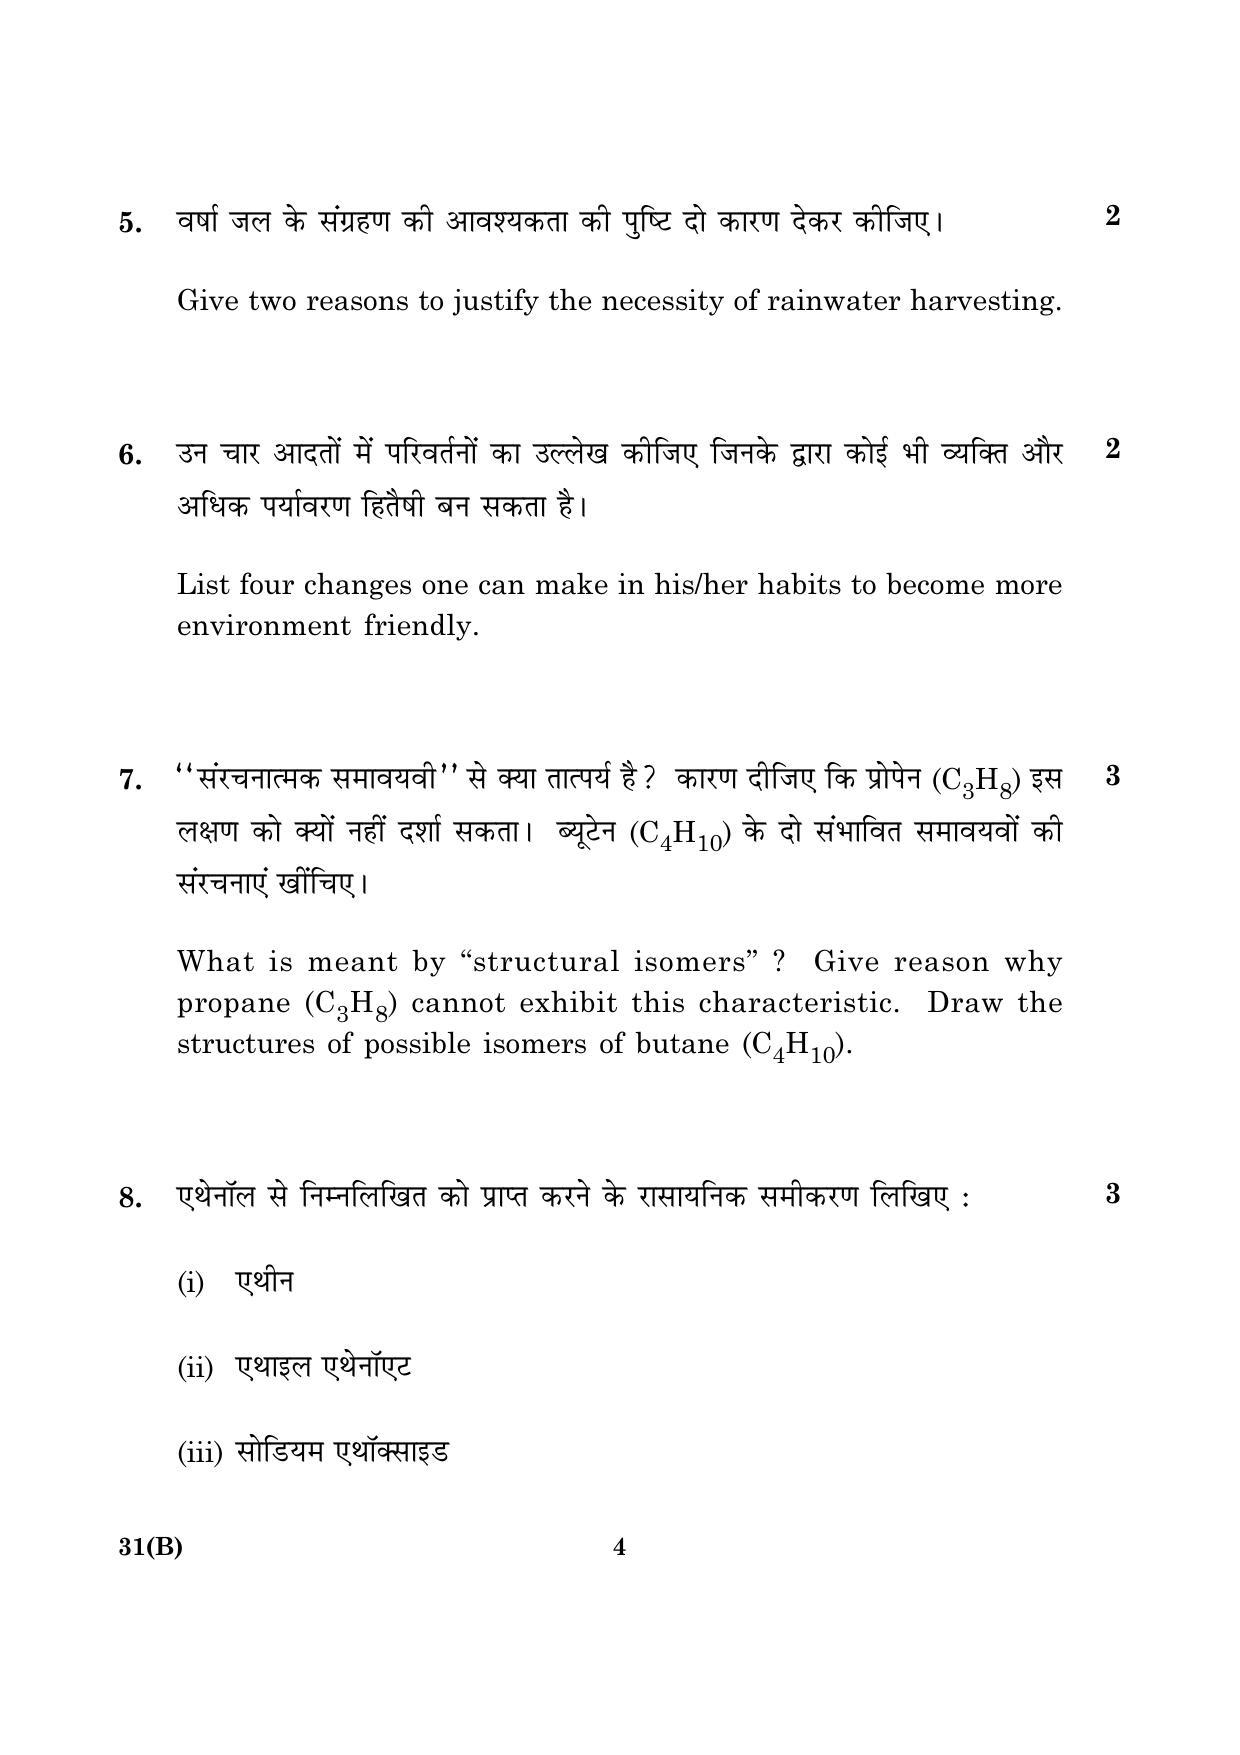 CBSE Class 10 031(B) Science 2016 Question Paper - Page 4